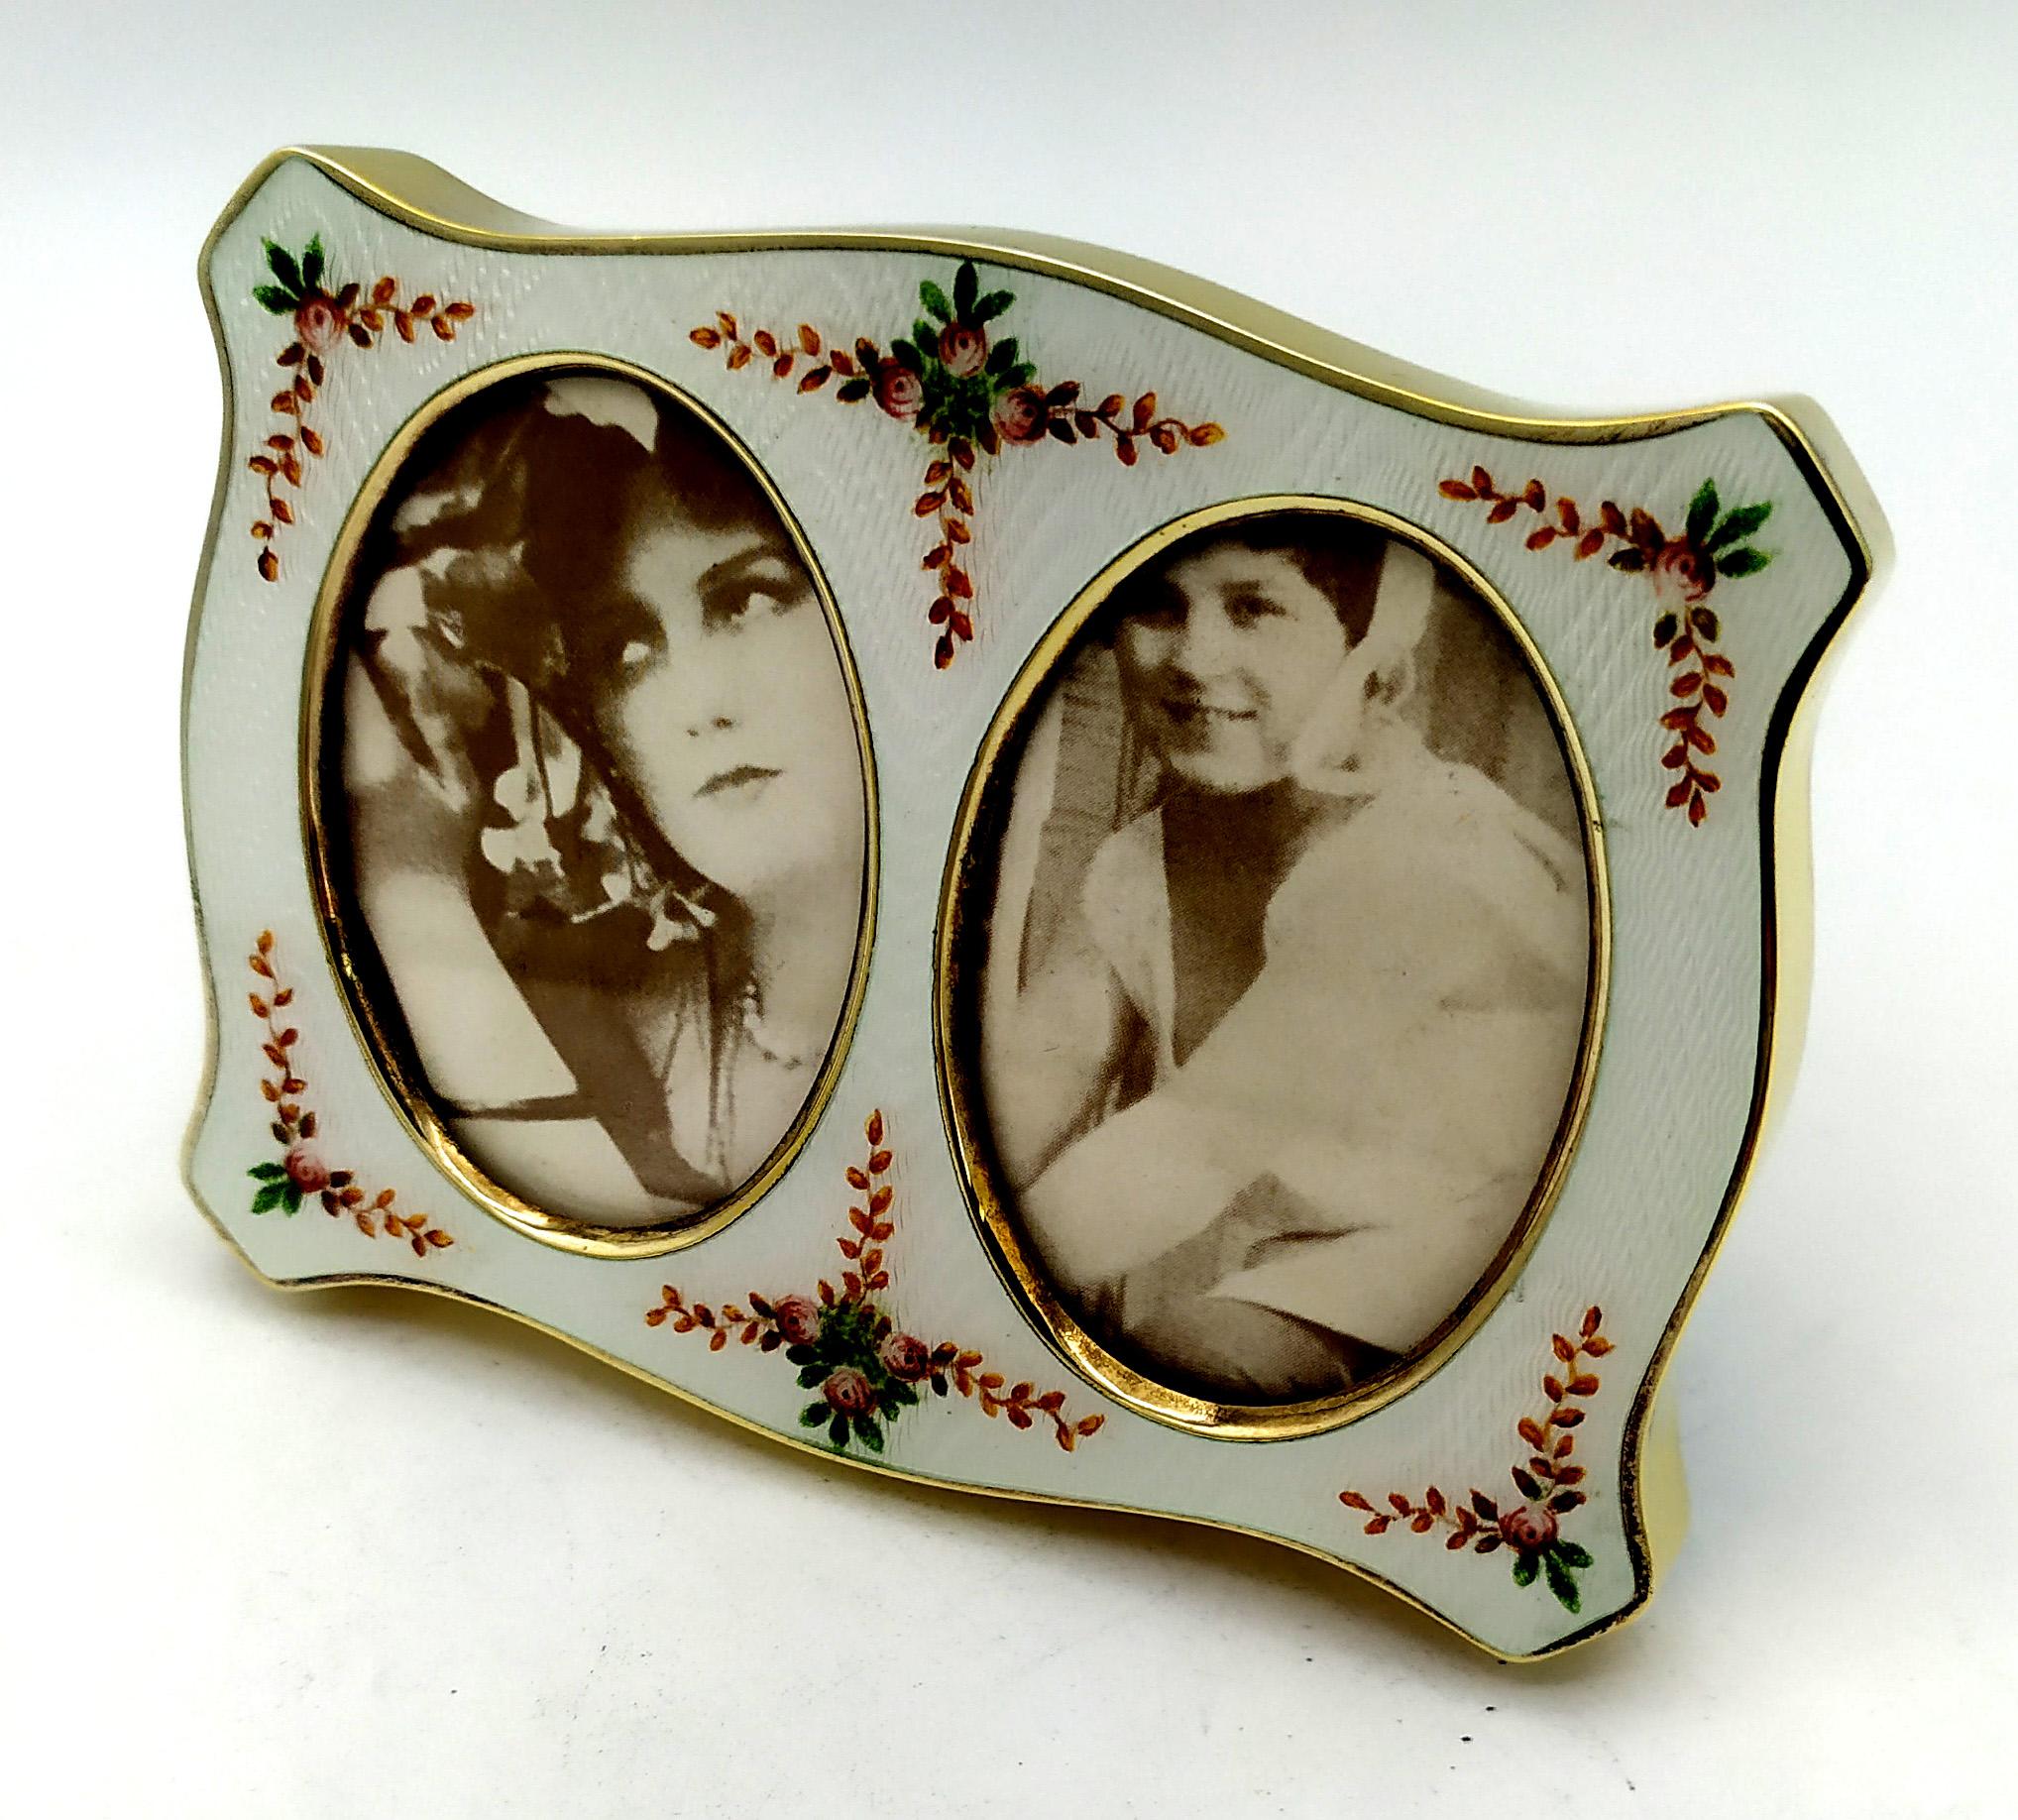 Shaped frame for 2 photographs in sterling Silver 925/1000 gold plated with translucent fired enamels on guillochè and hand-painted floral miniatures. Viennese Art Nouveau style second half of the 19th century. Blue velvet panel. External measures